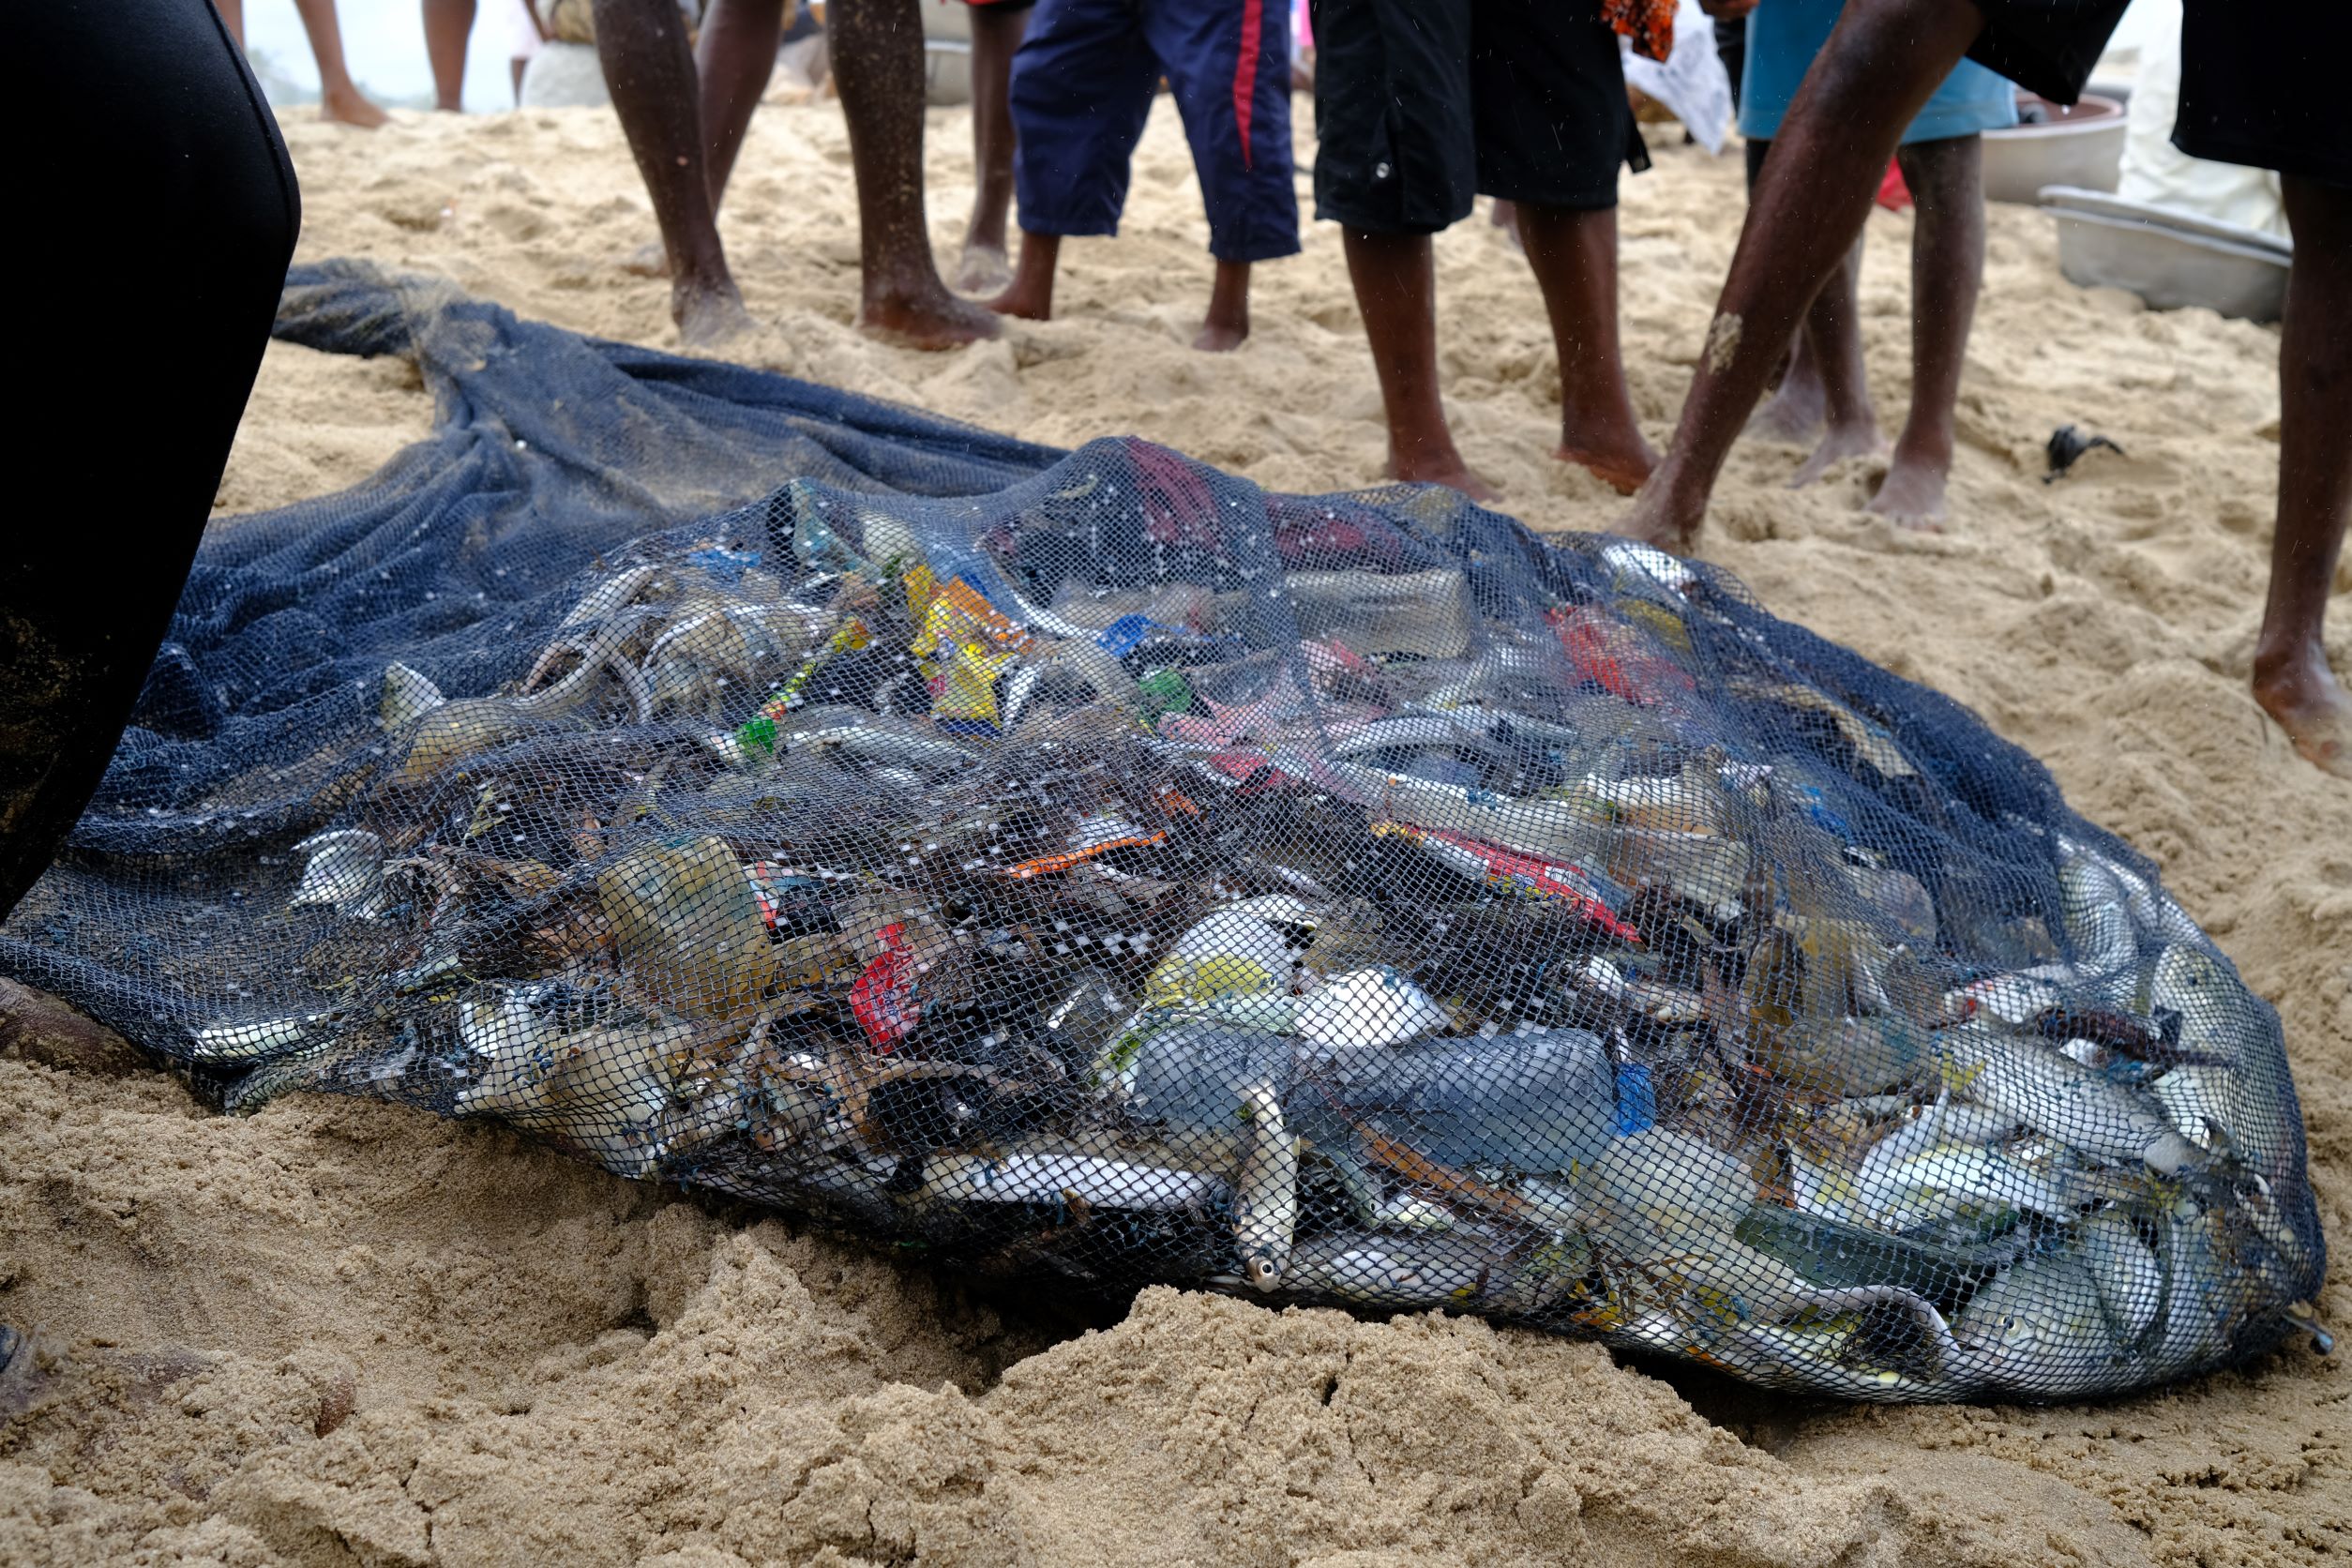 Catch by fishers at Bortiano landing beach, contains plastic waste, credit: AL-Fattah